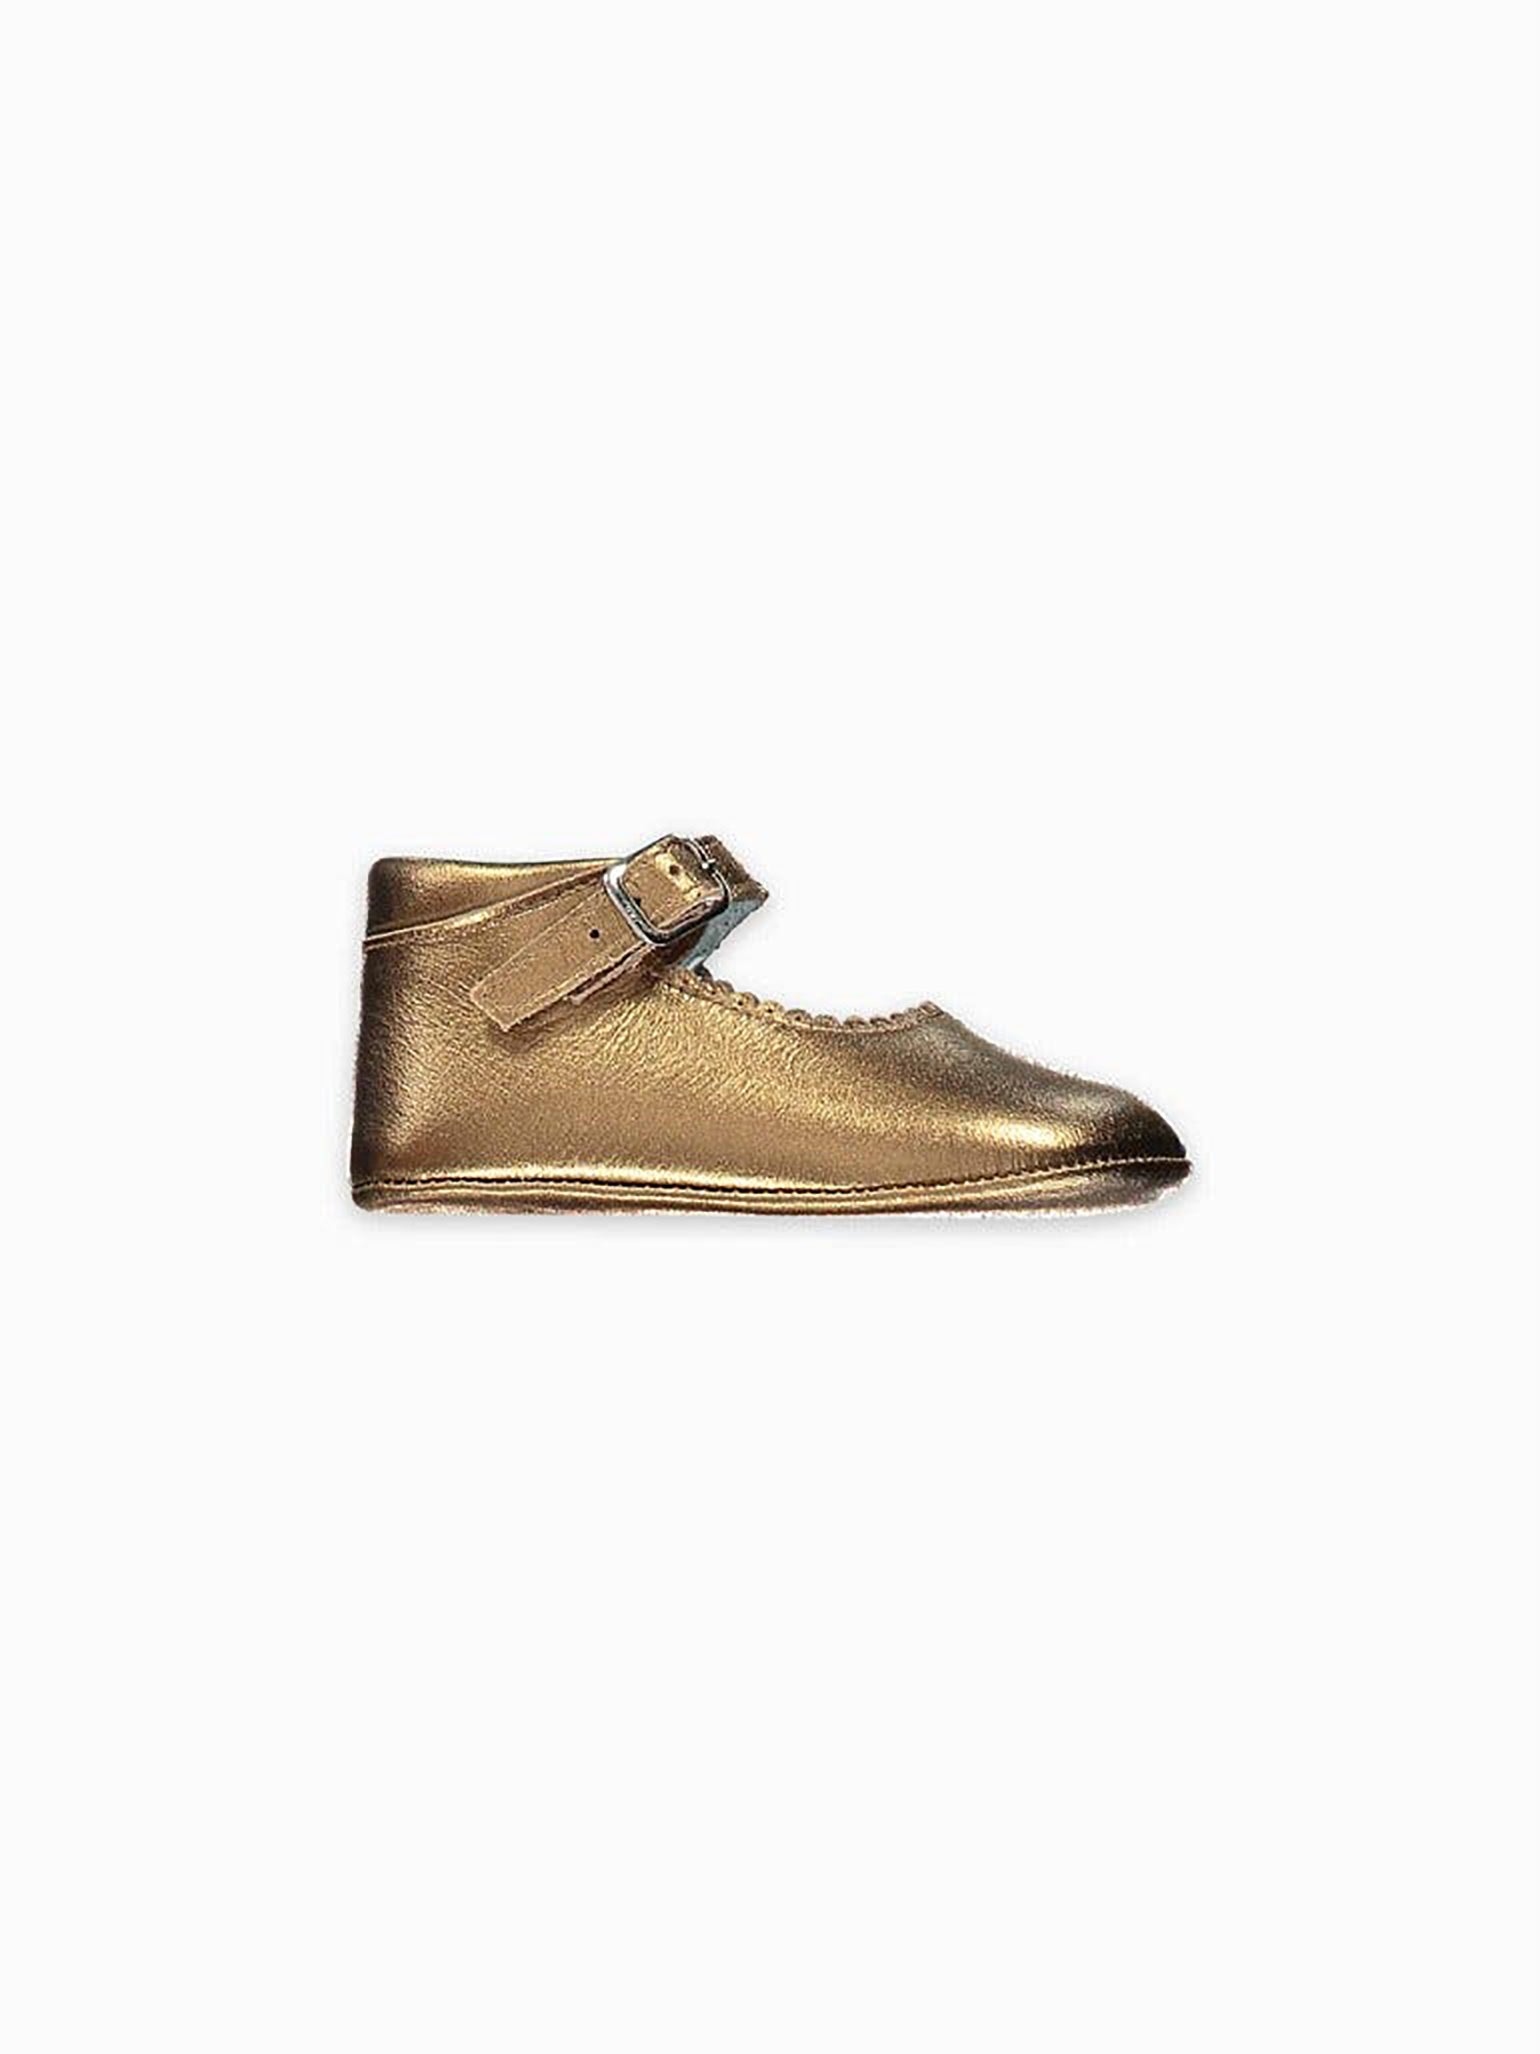 Bronze Leather Baby Mary Jane Shoes